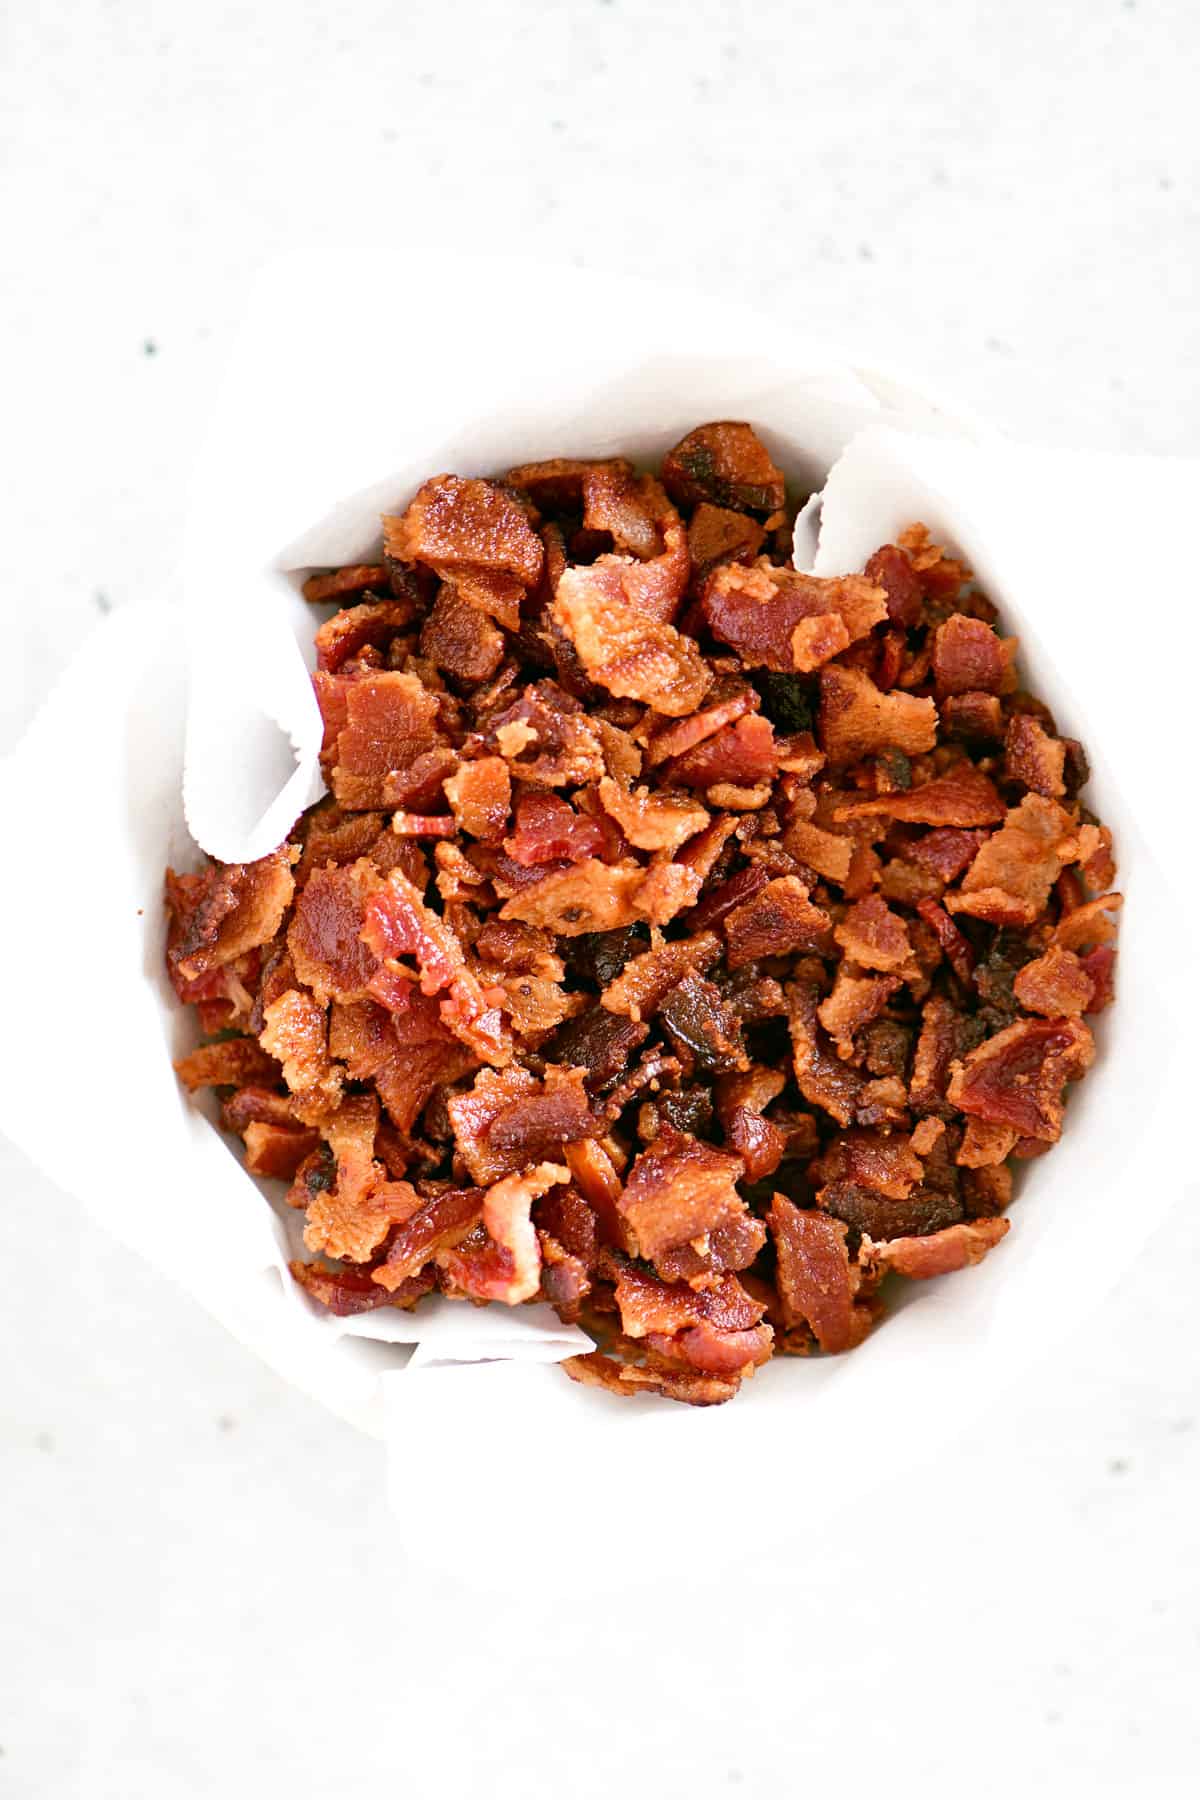 Bacon bits in a bowl.